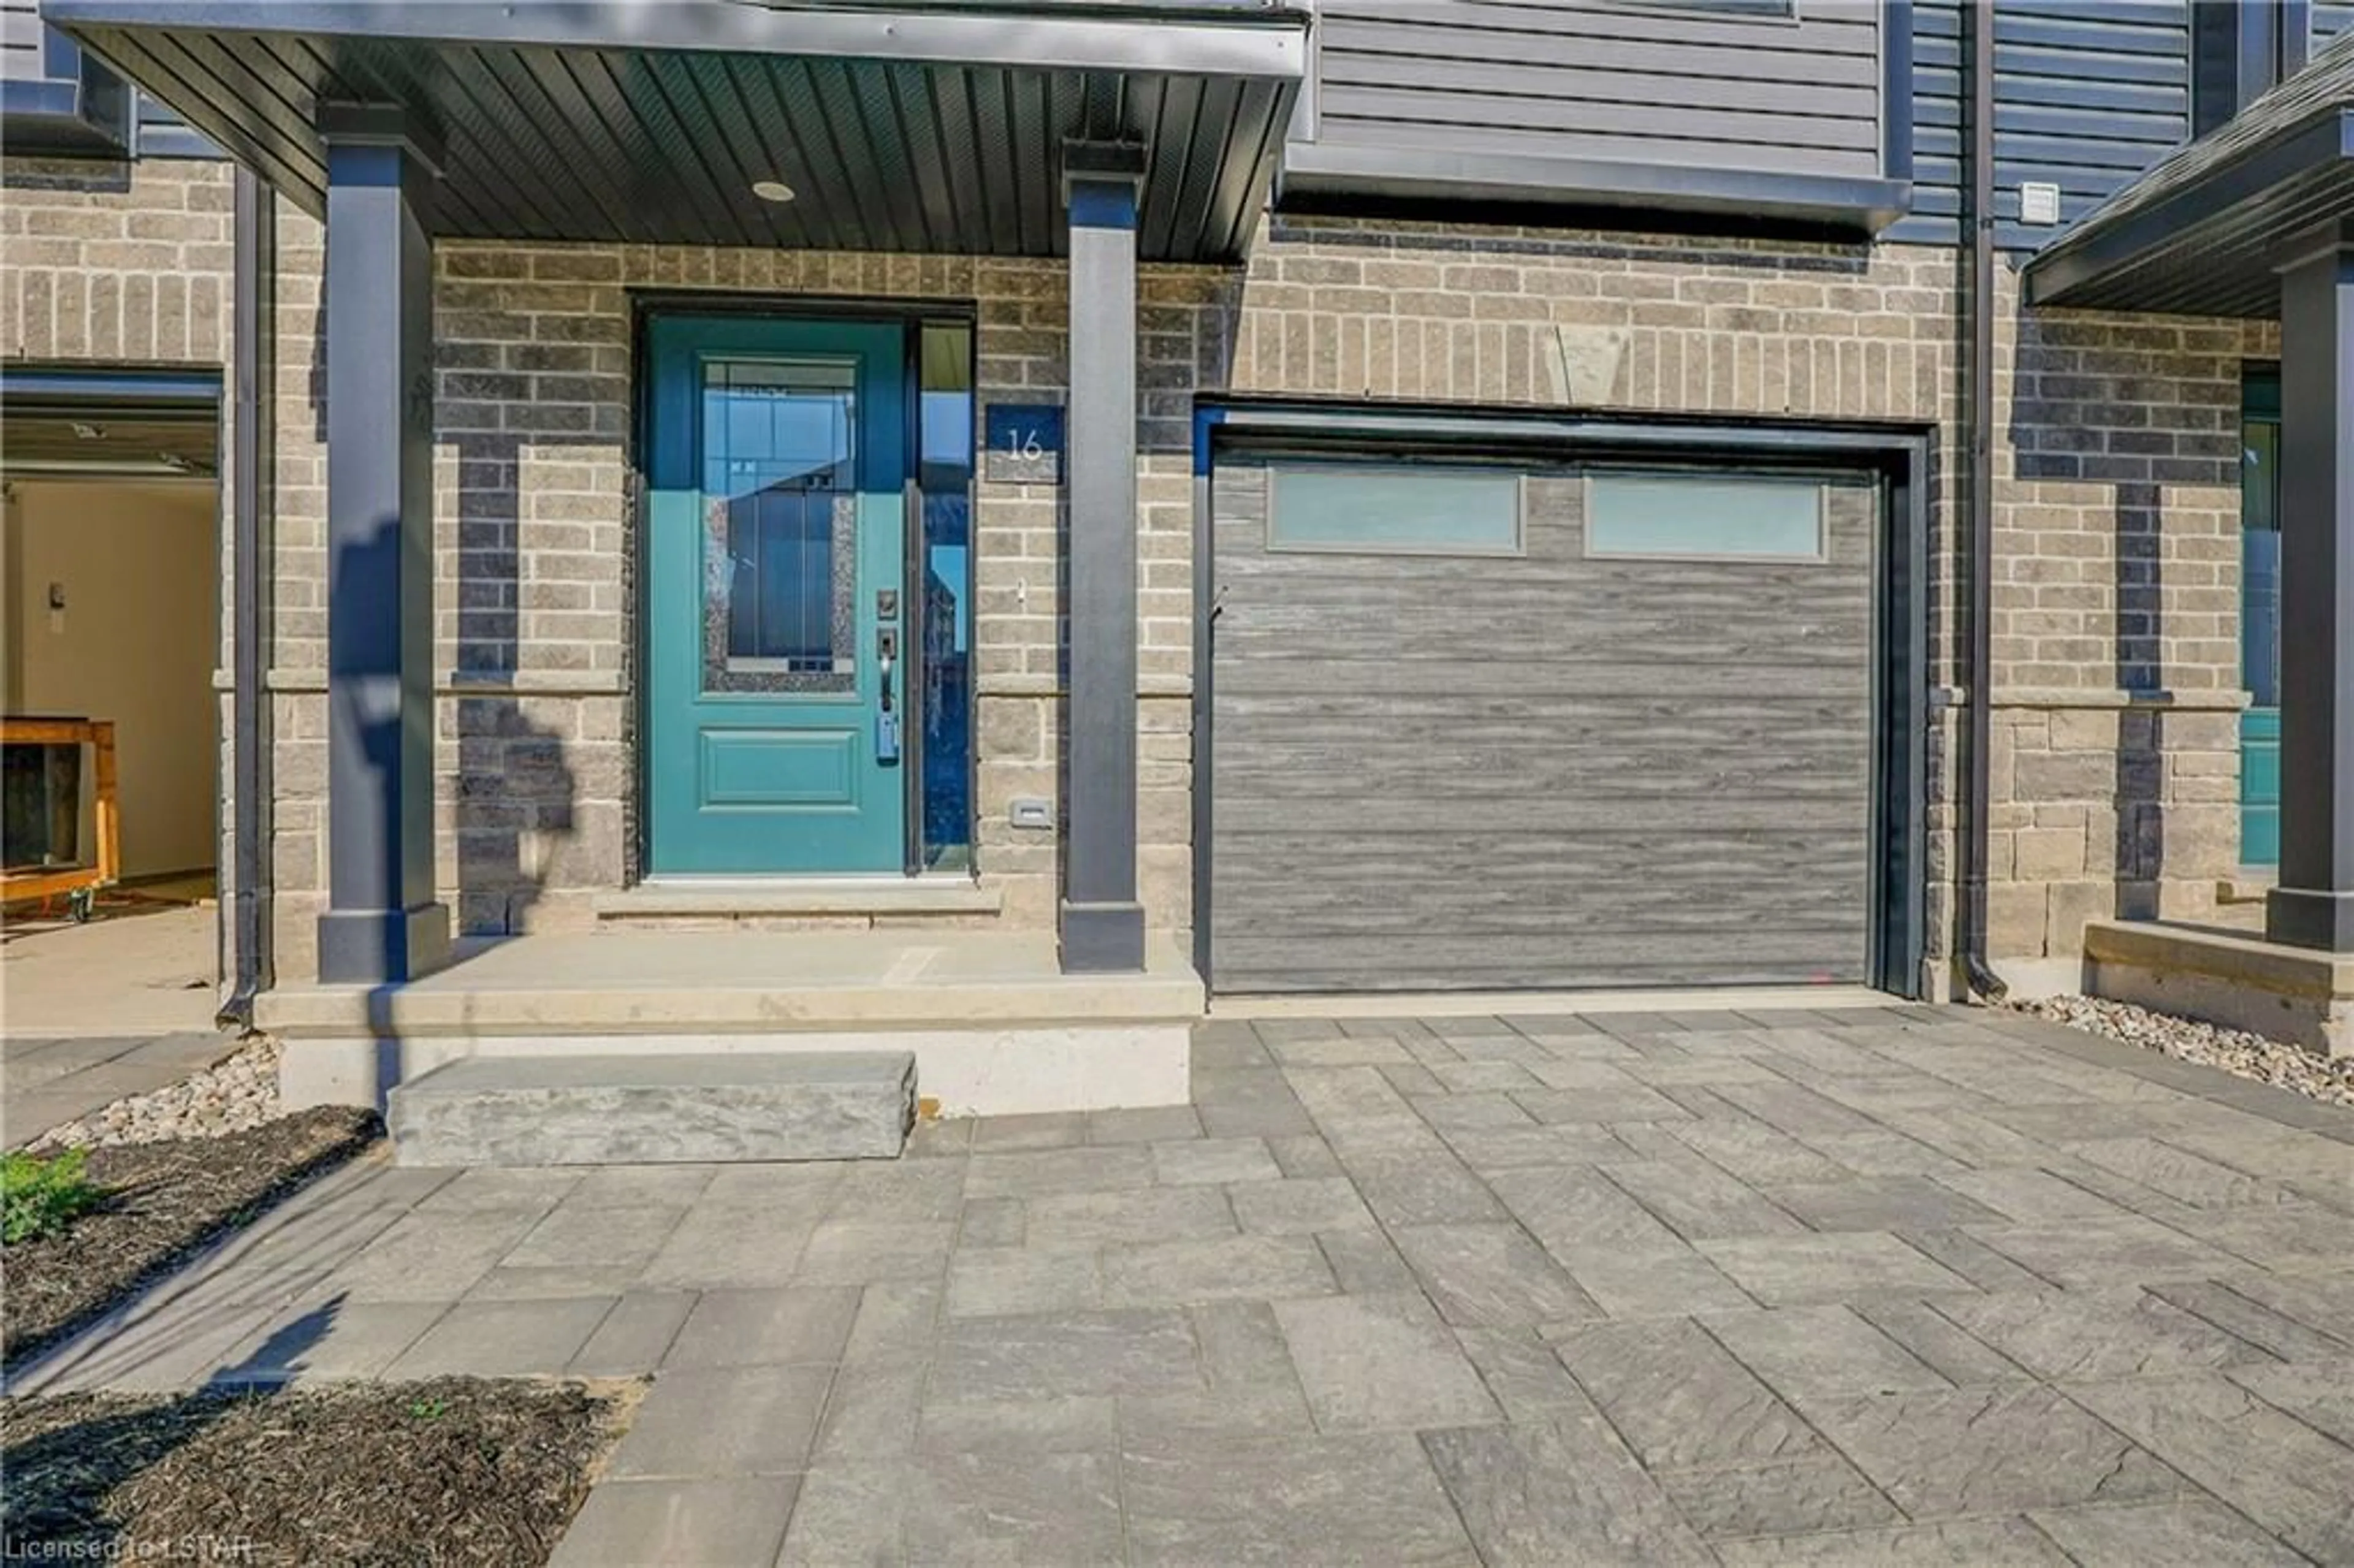 Home with brick exterior material for 2261 Linkway Blvd #16, London Ontario N6K 0L4